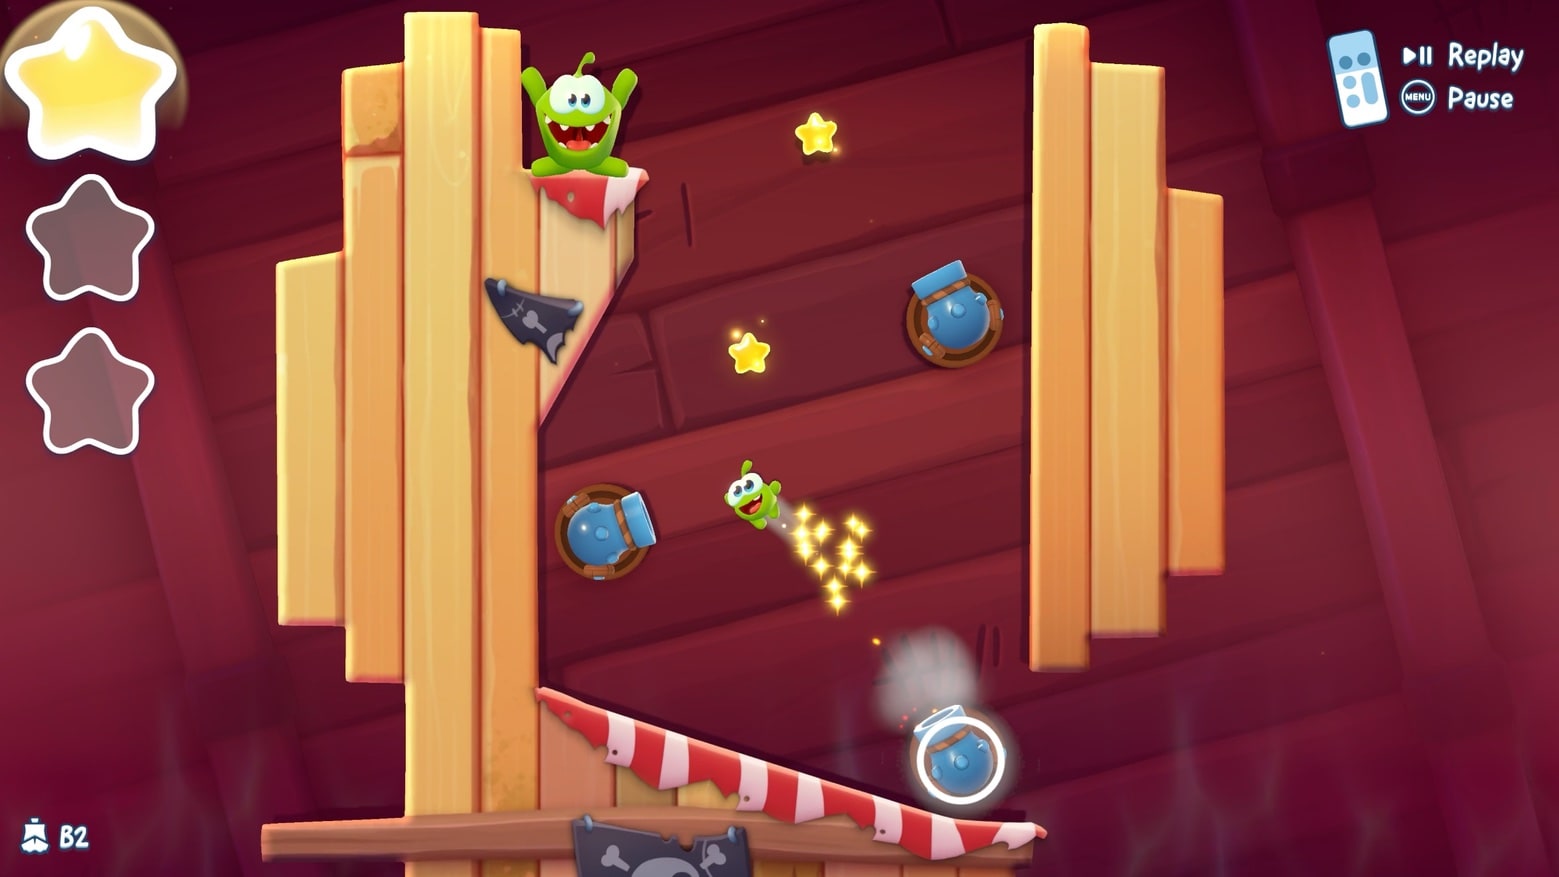 Cut the Rope 3 Brings a New Adventure to Apple Arcade - CNET